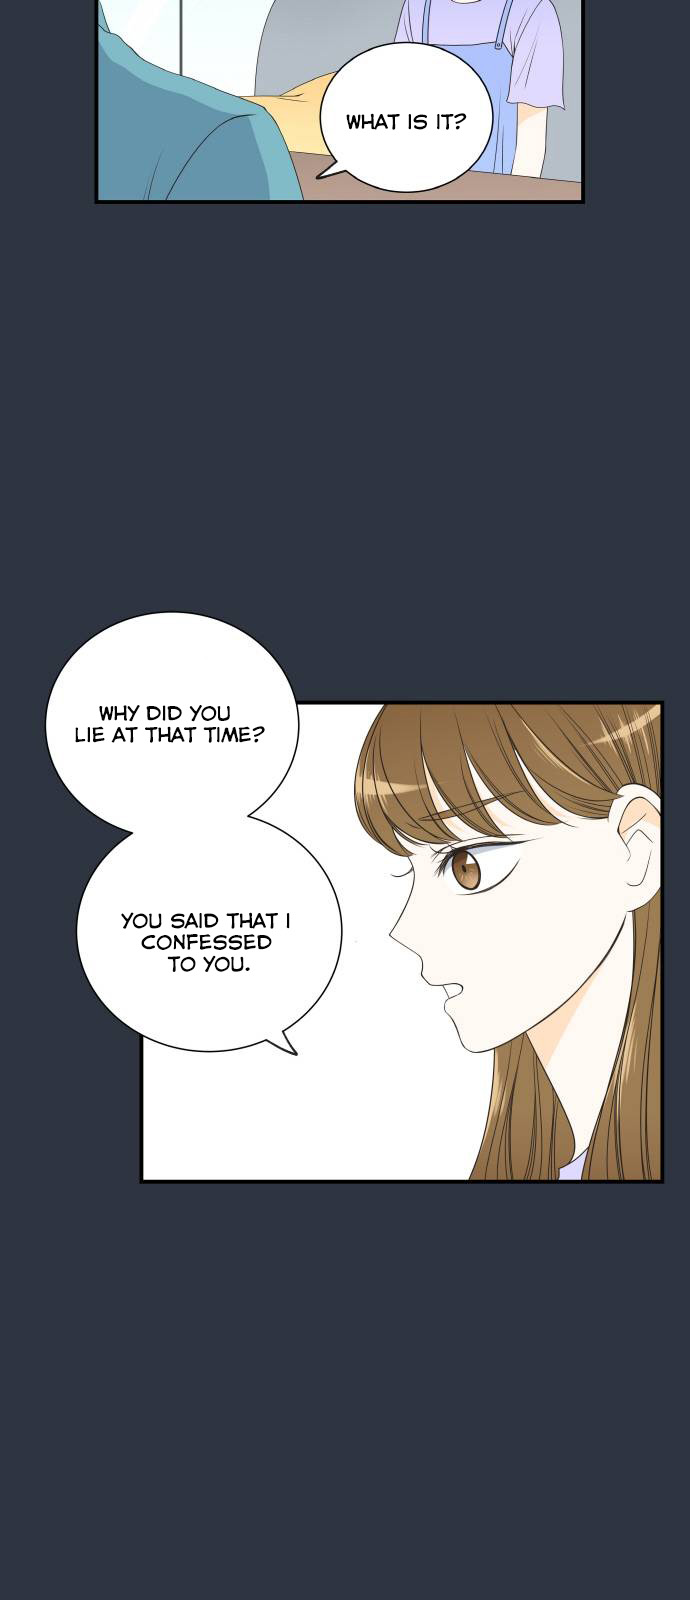 It Is My First Love Vol. 1 Ch. 14